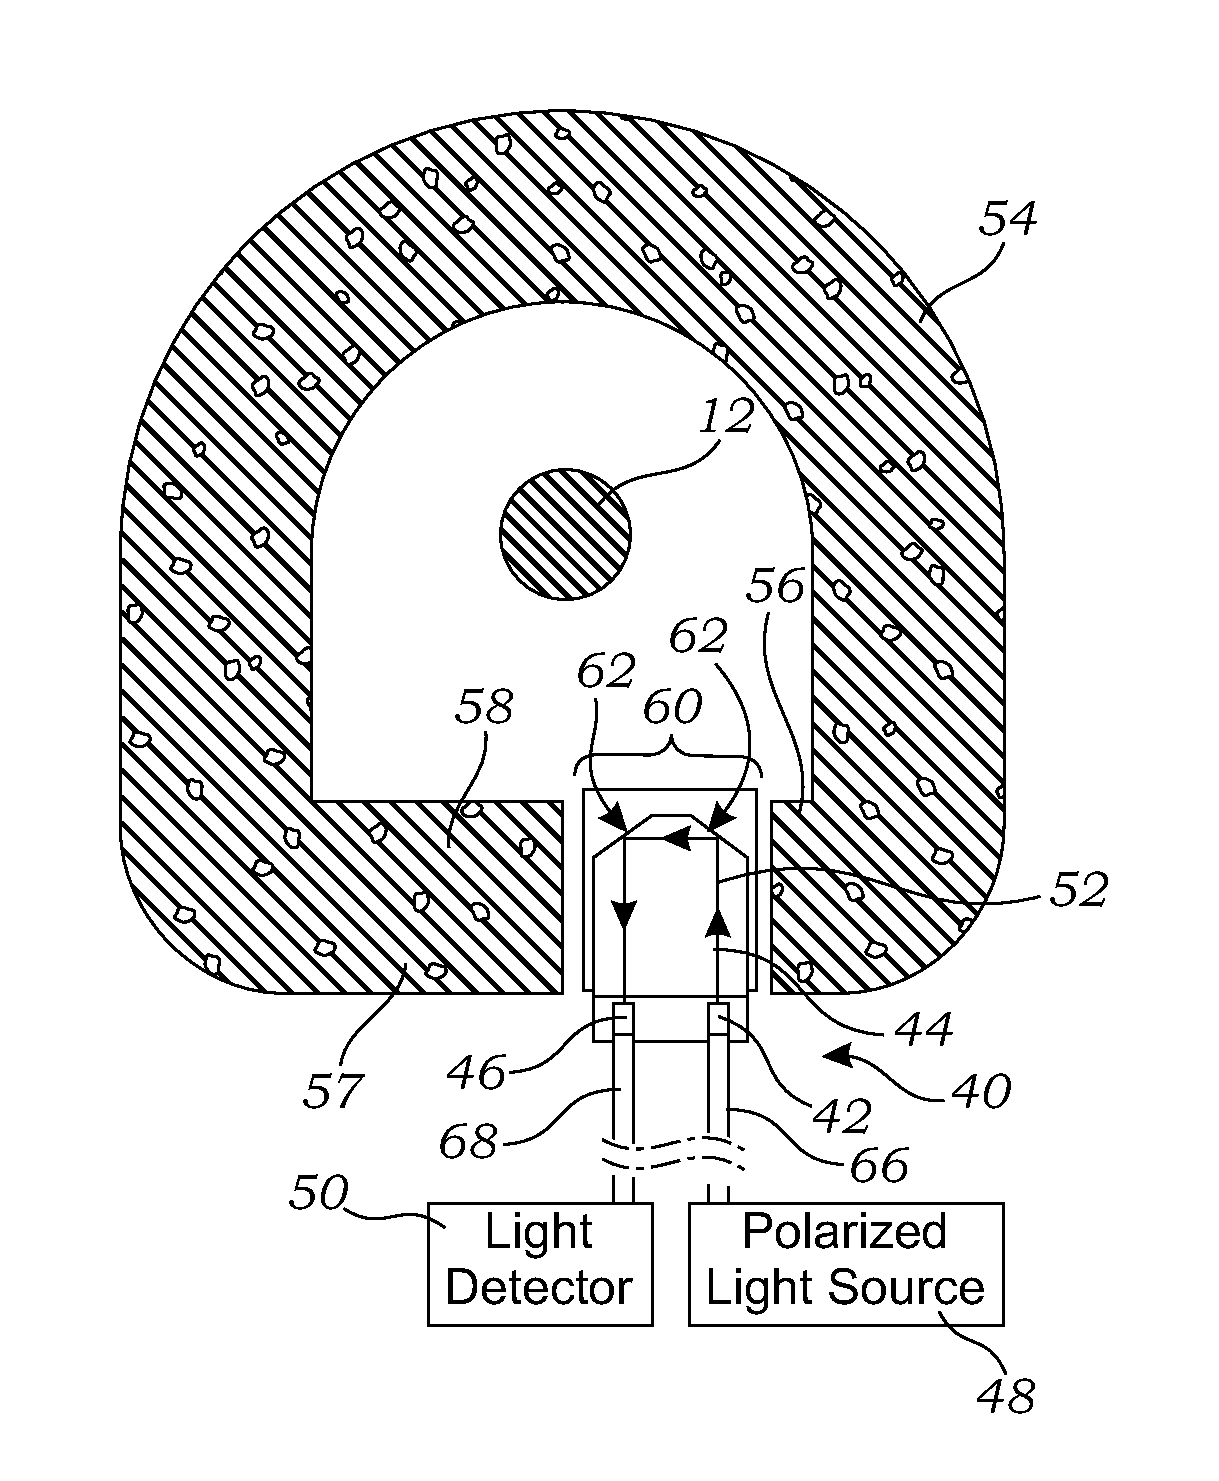 Method for measuring current in an electric power distribution system